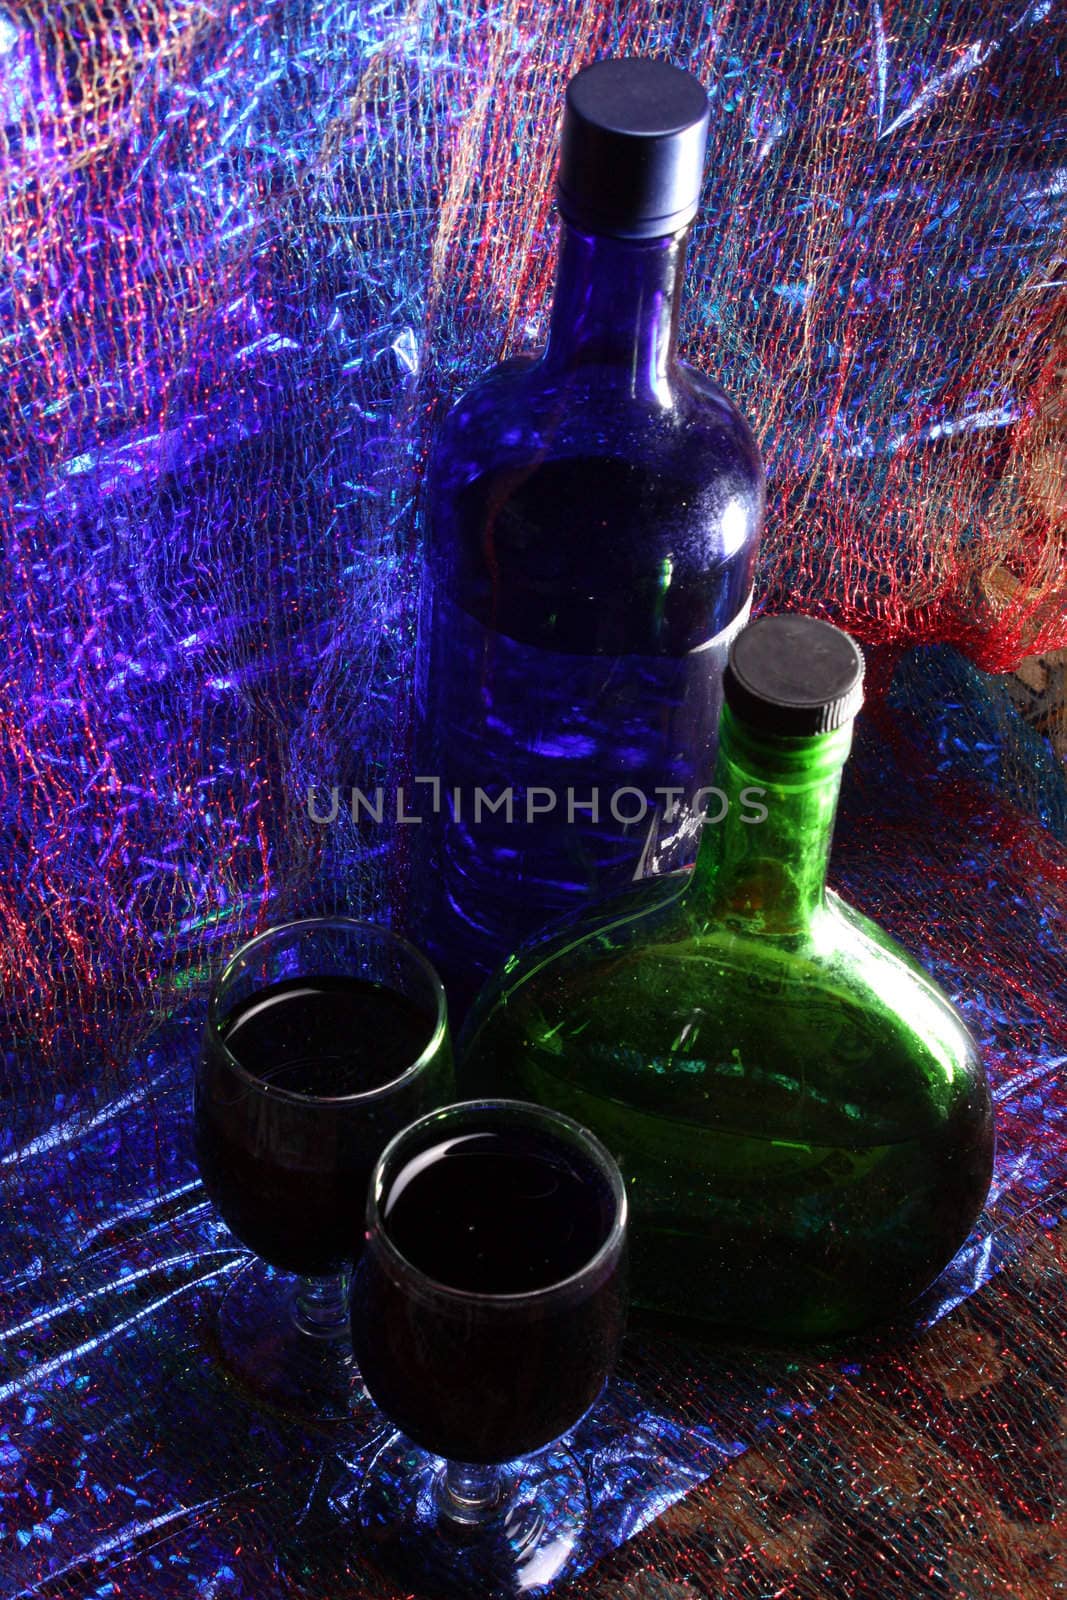 Bottles of liquor and glasses in colorful party lights.